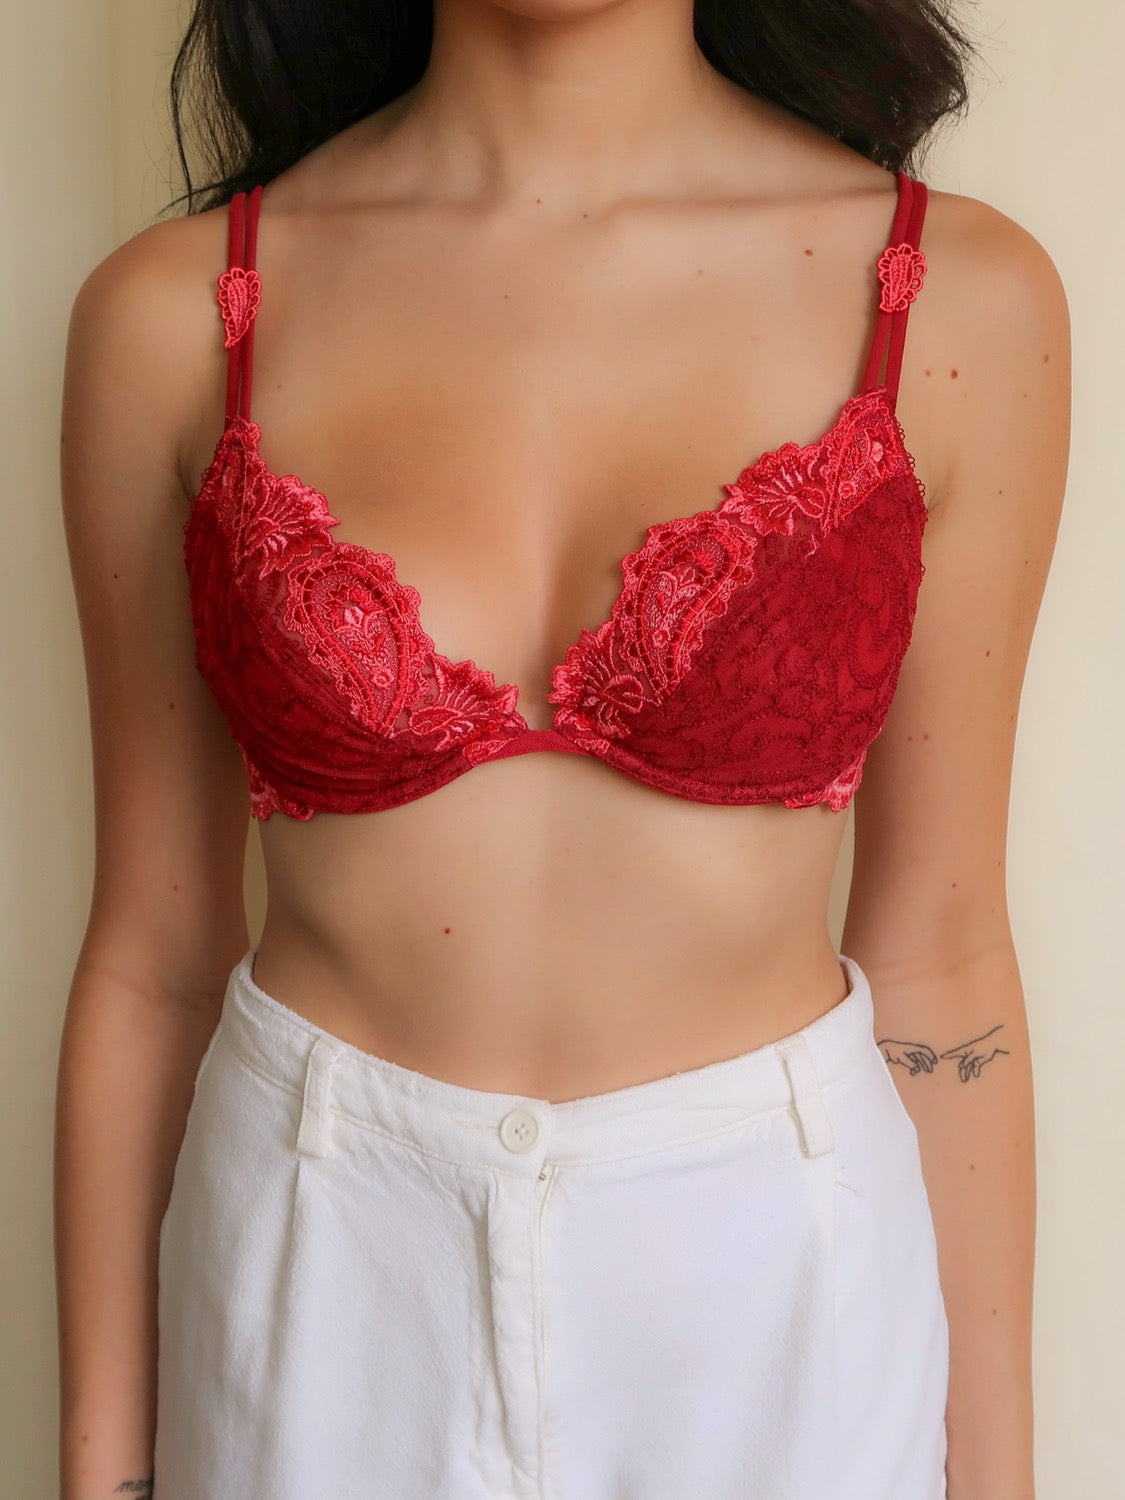 VINTAGE FRENCH RED PAISLEY BRALETTE - (34C/36B/32D)